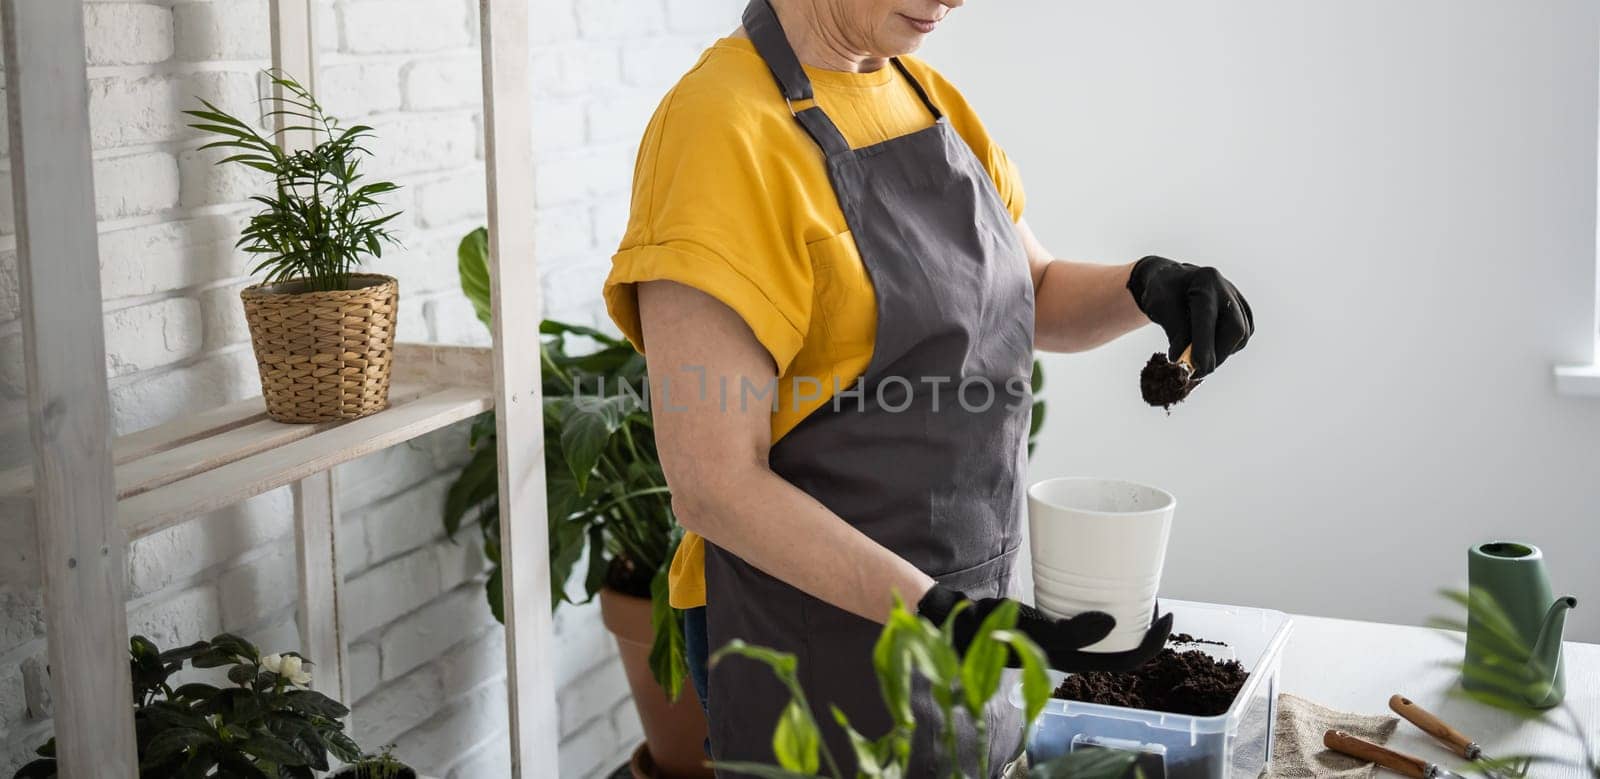 Banner Middle aged woman in an apron clothes takes care of potted plant in pot. Home gardening and floriculture copy space. House with green plants and cottagecore botanic florist concept by Satura86